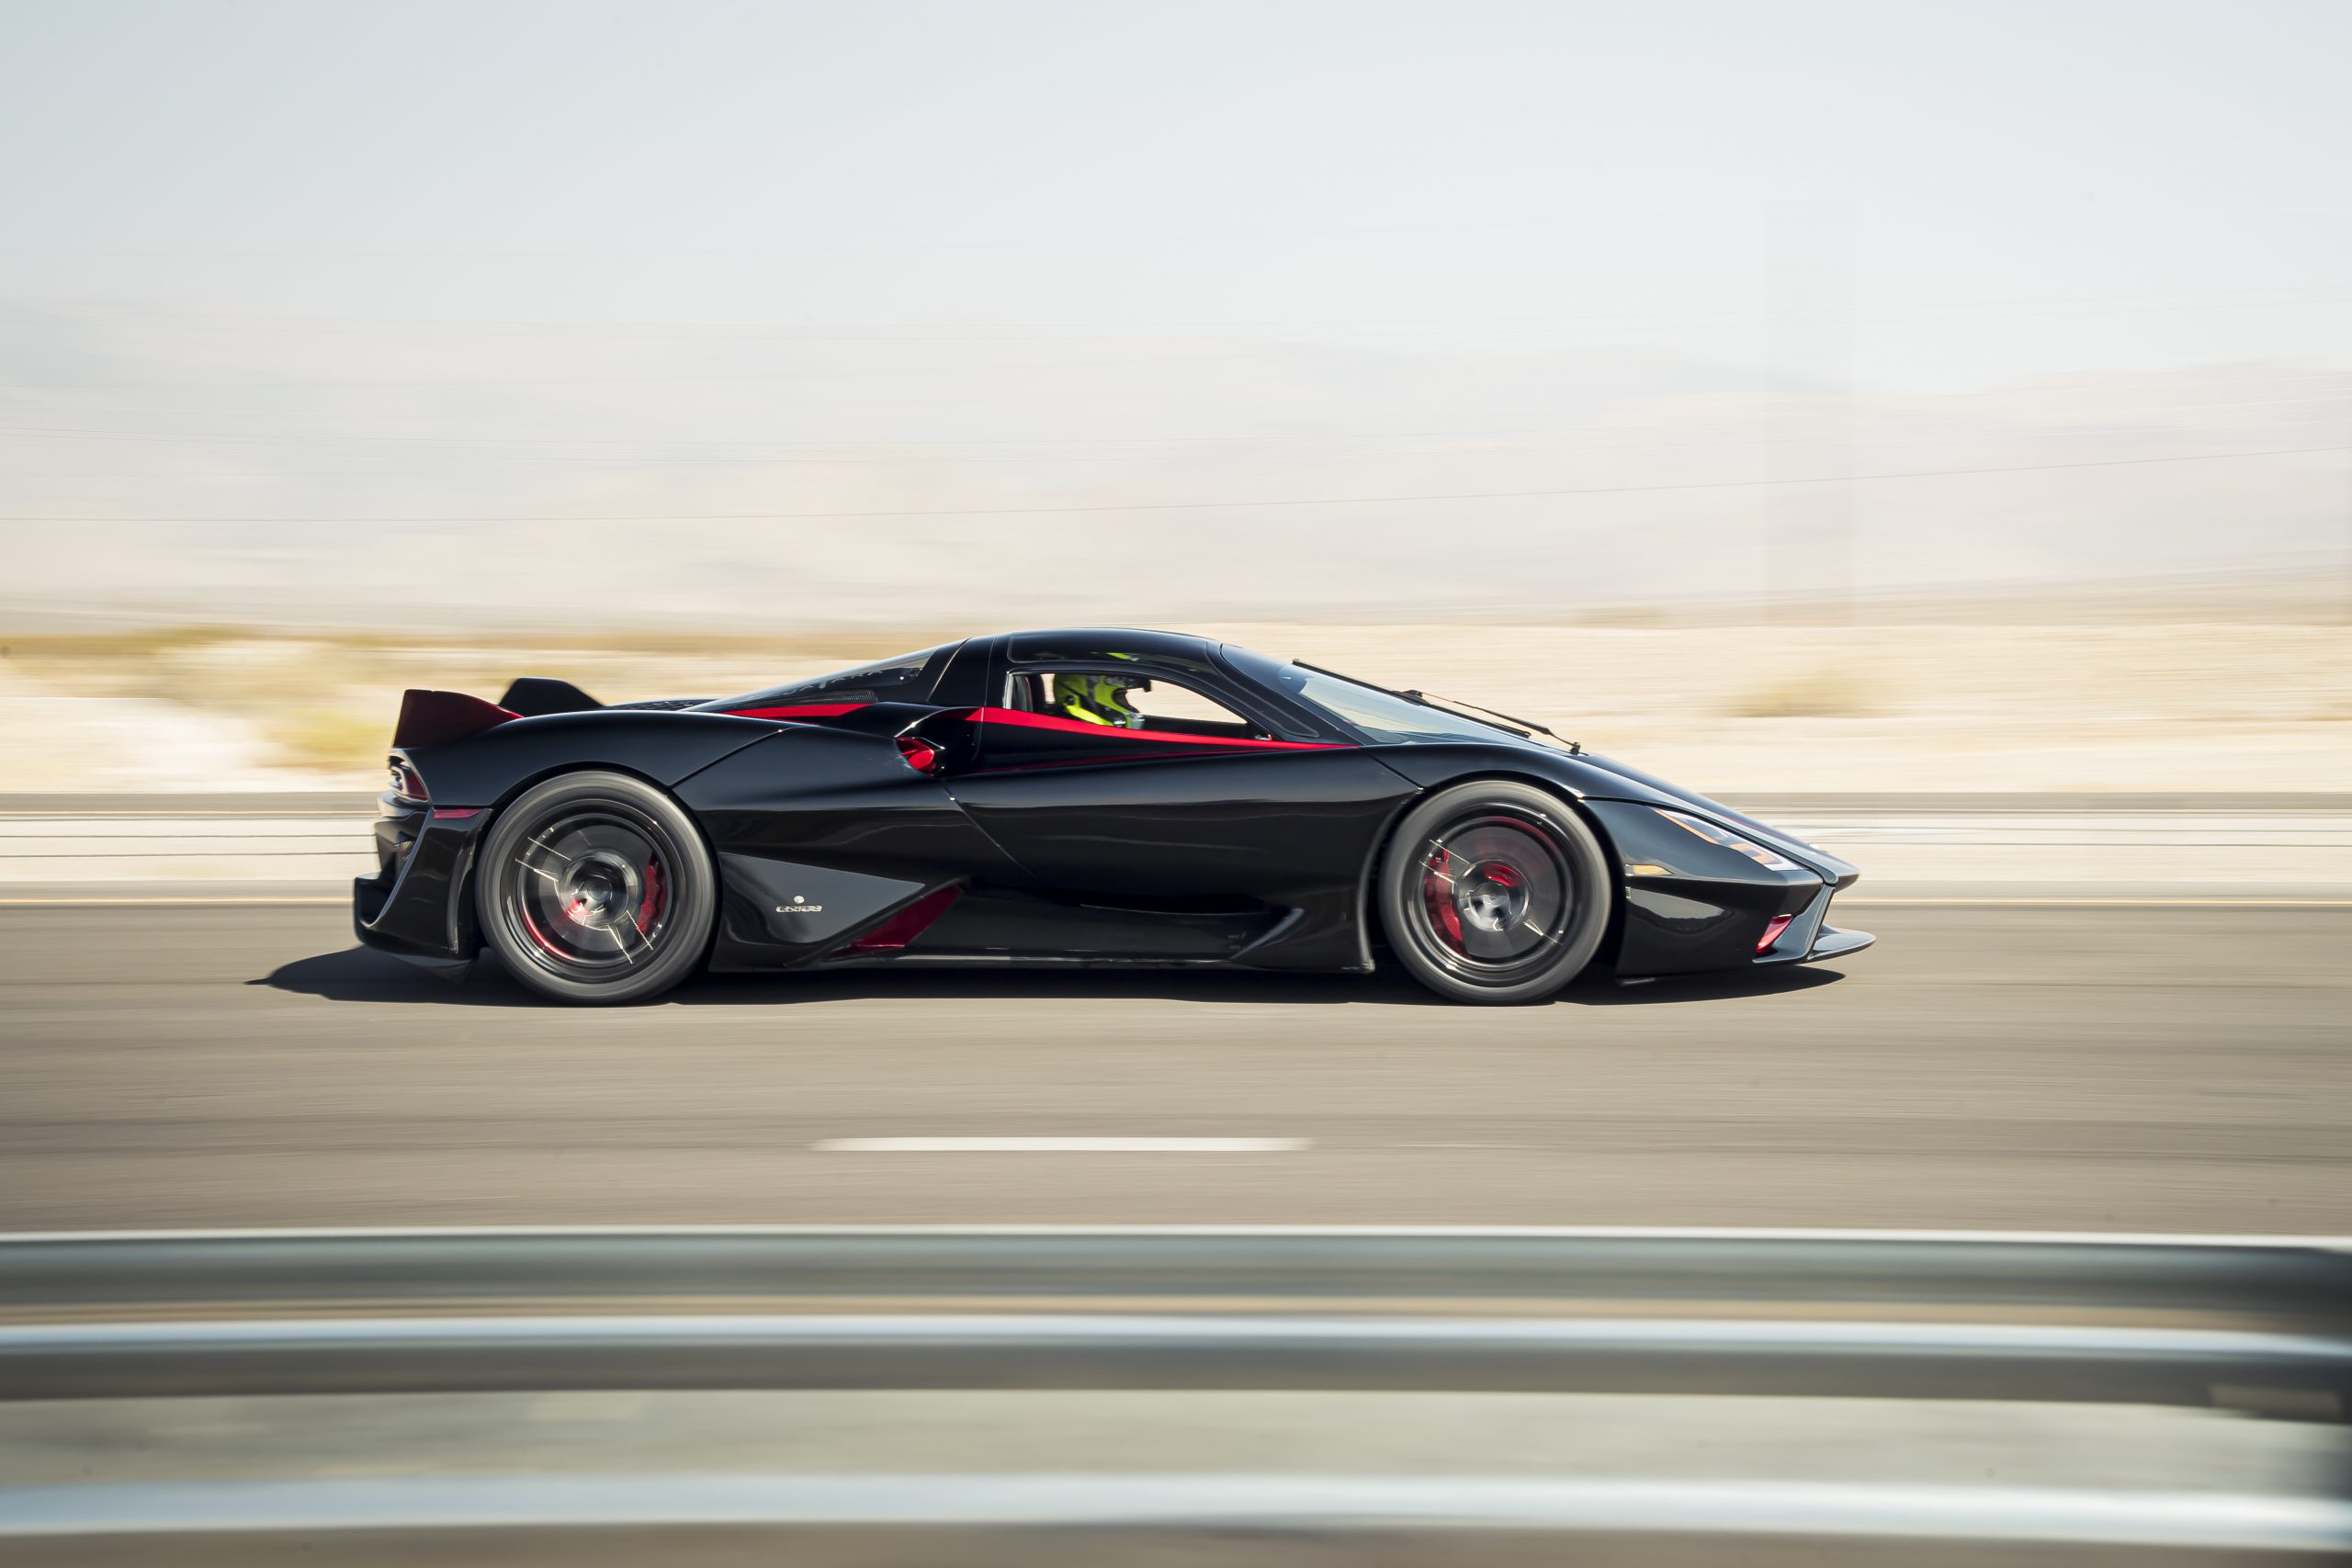 Astonishingly, at 316mph, the SSC Tuatara would be travelling at 463 feet per second.